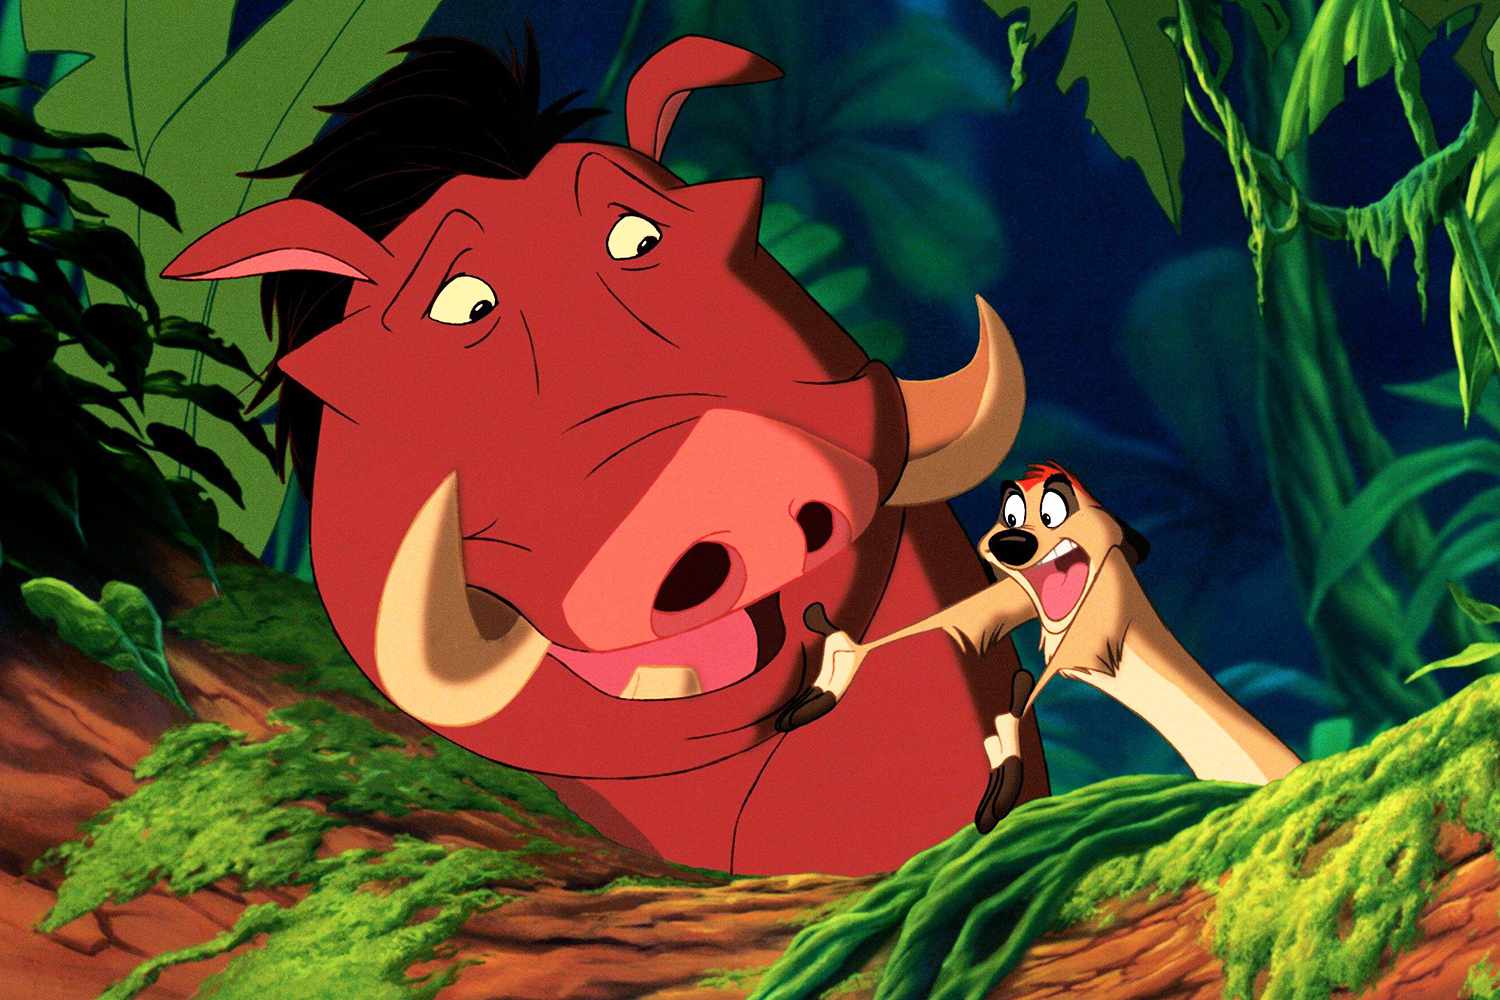 Why Does Pumbaa Fart in “The Lion King”? Original Voice Stars Reveal Real Reason Behind 'Flatulent Noises'